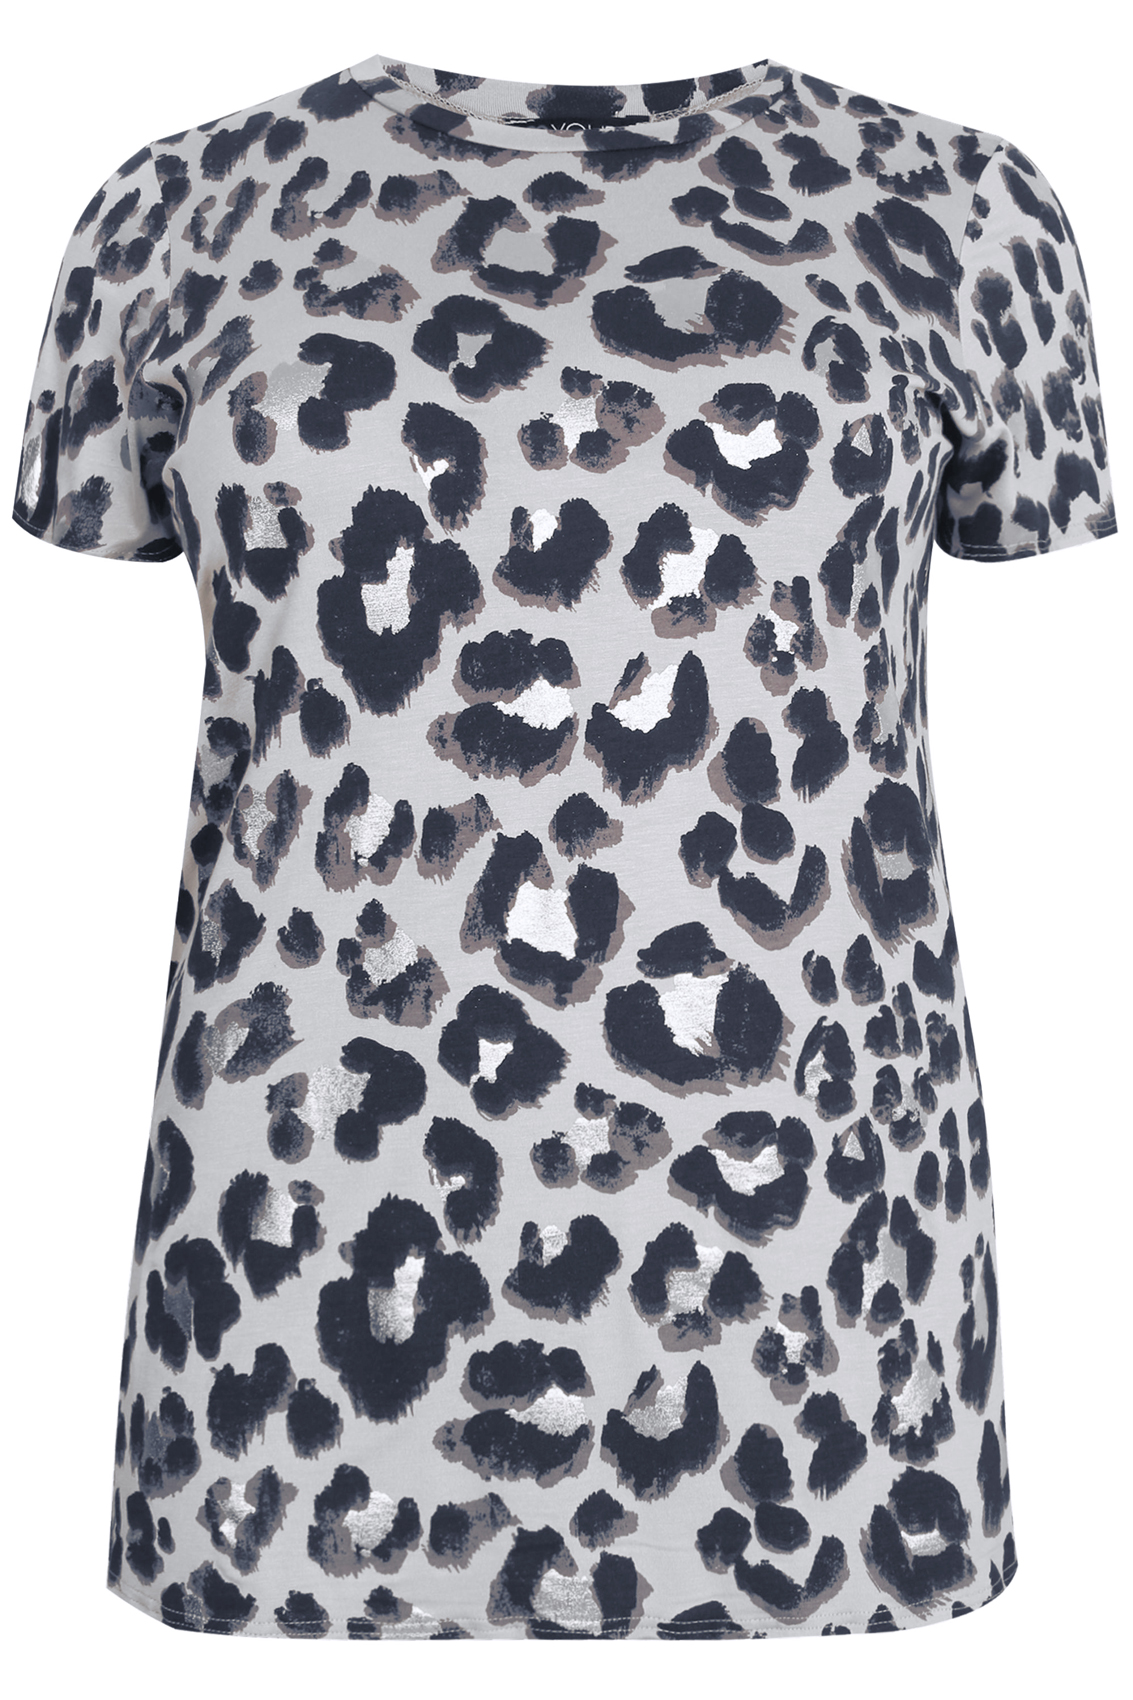 Grey & Silver Leopard Print Top With Side Slits, Plus Size 16 to 32